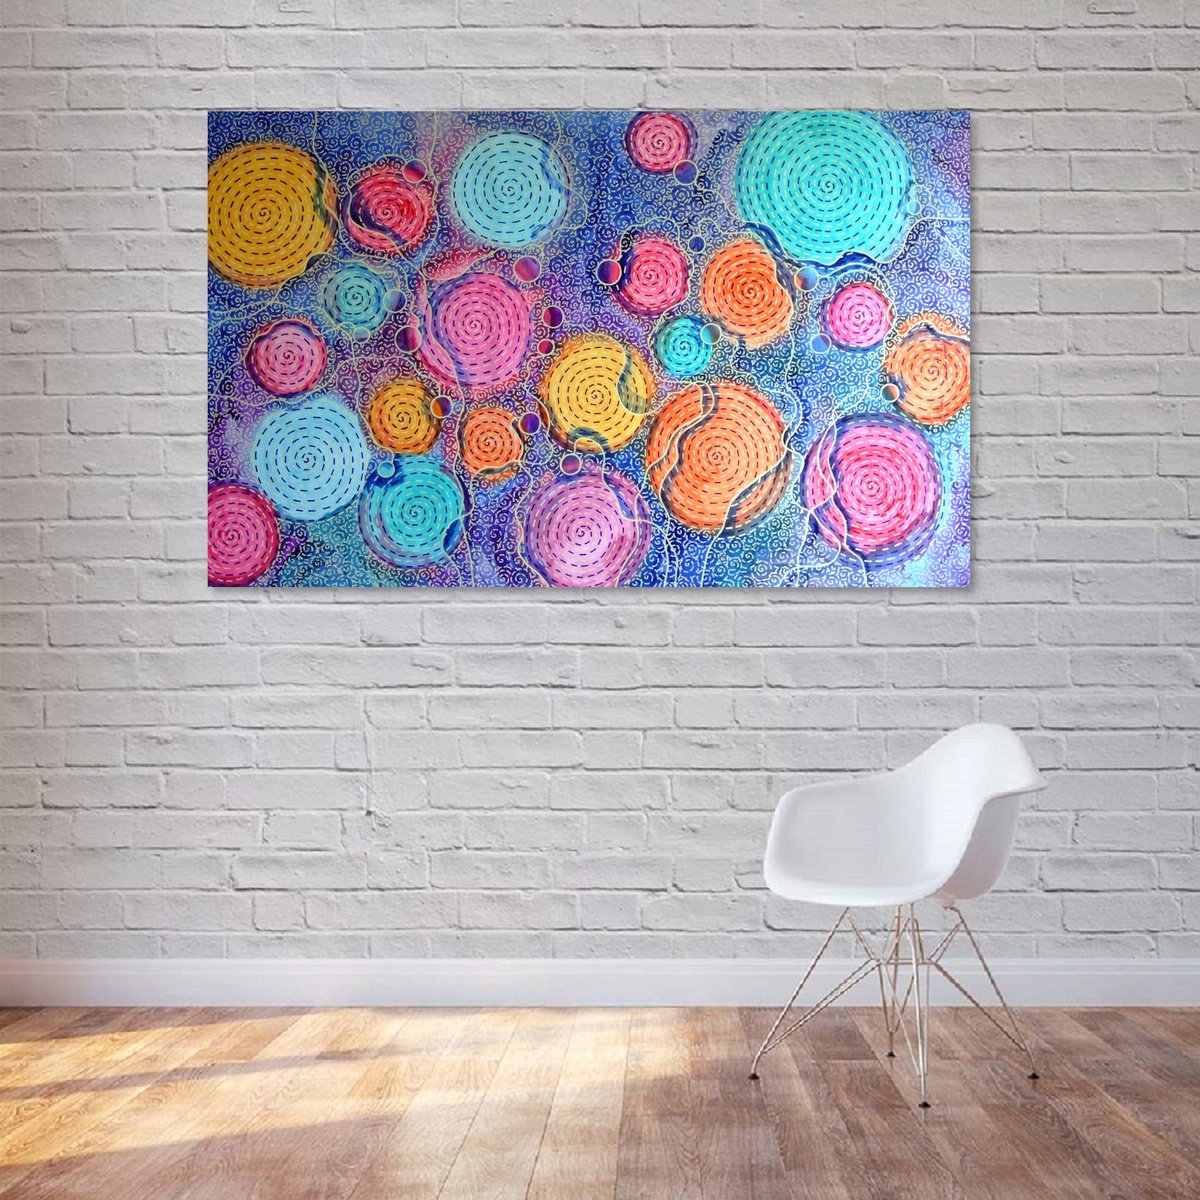 Psychedelic Garden #20 - Extra Large Painting - Shipping Rolled in a Tube by Marina Krylova